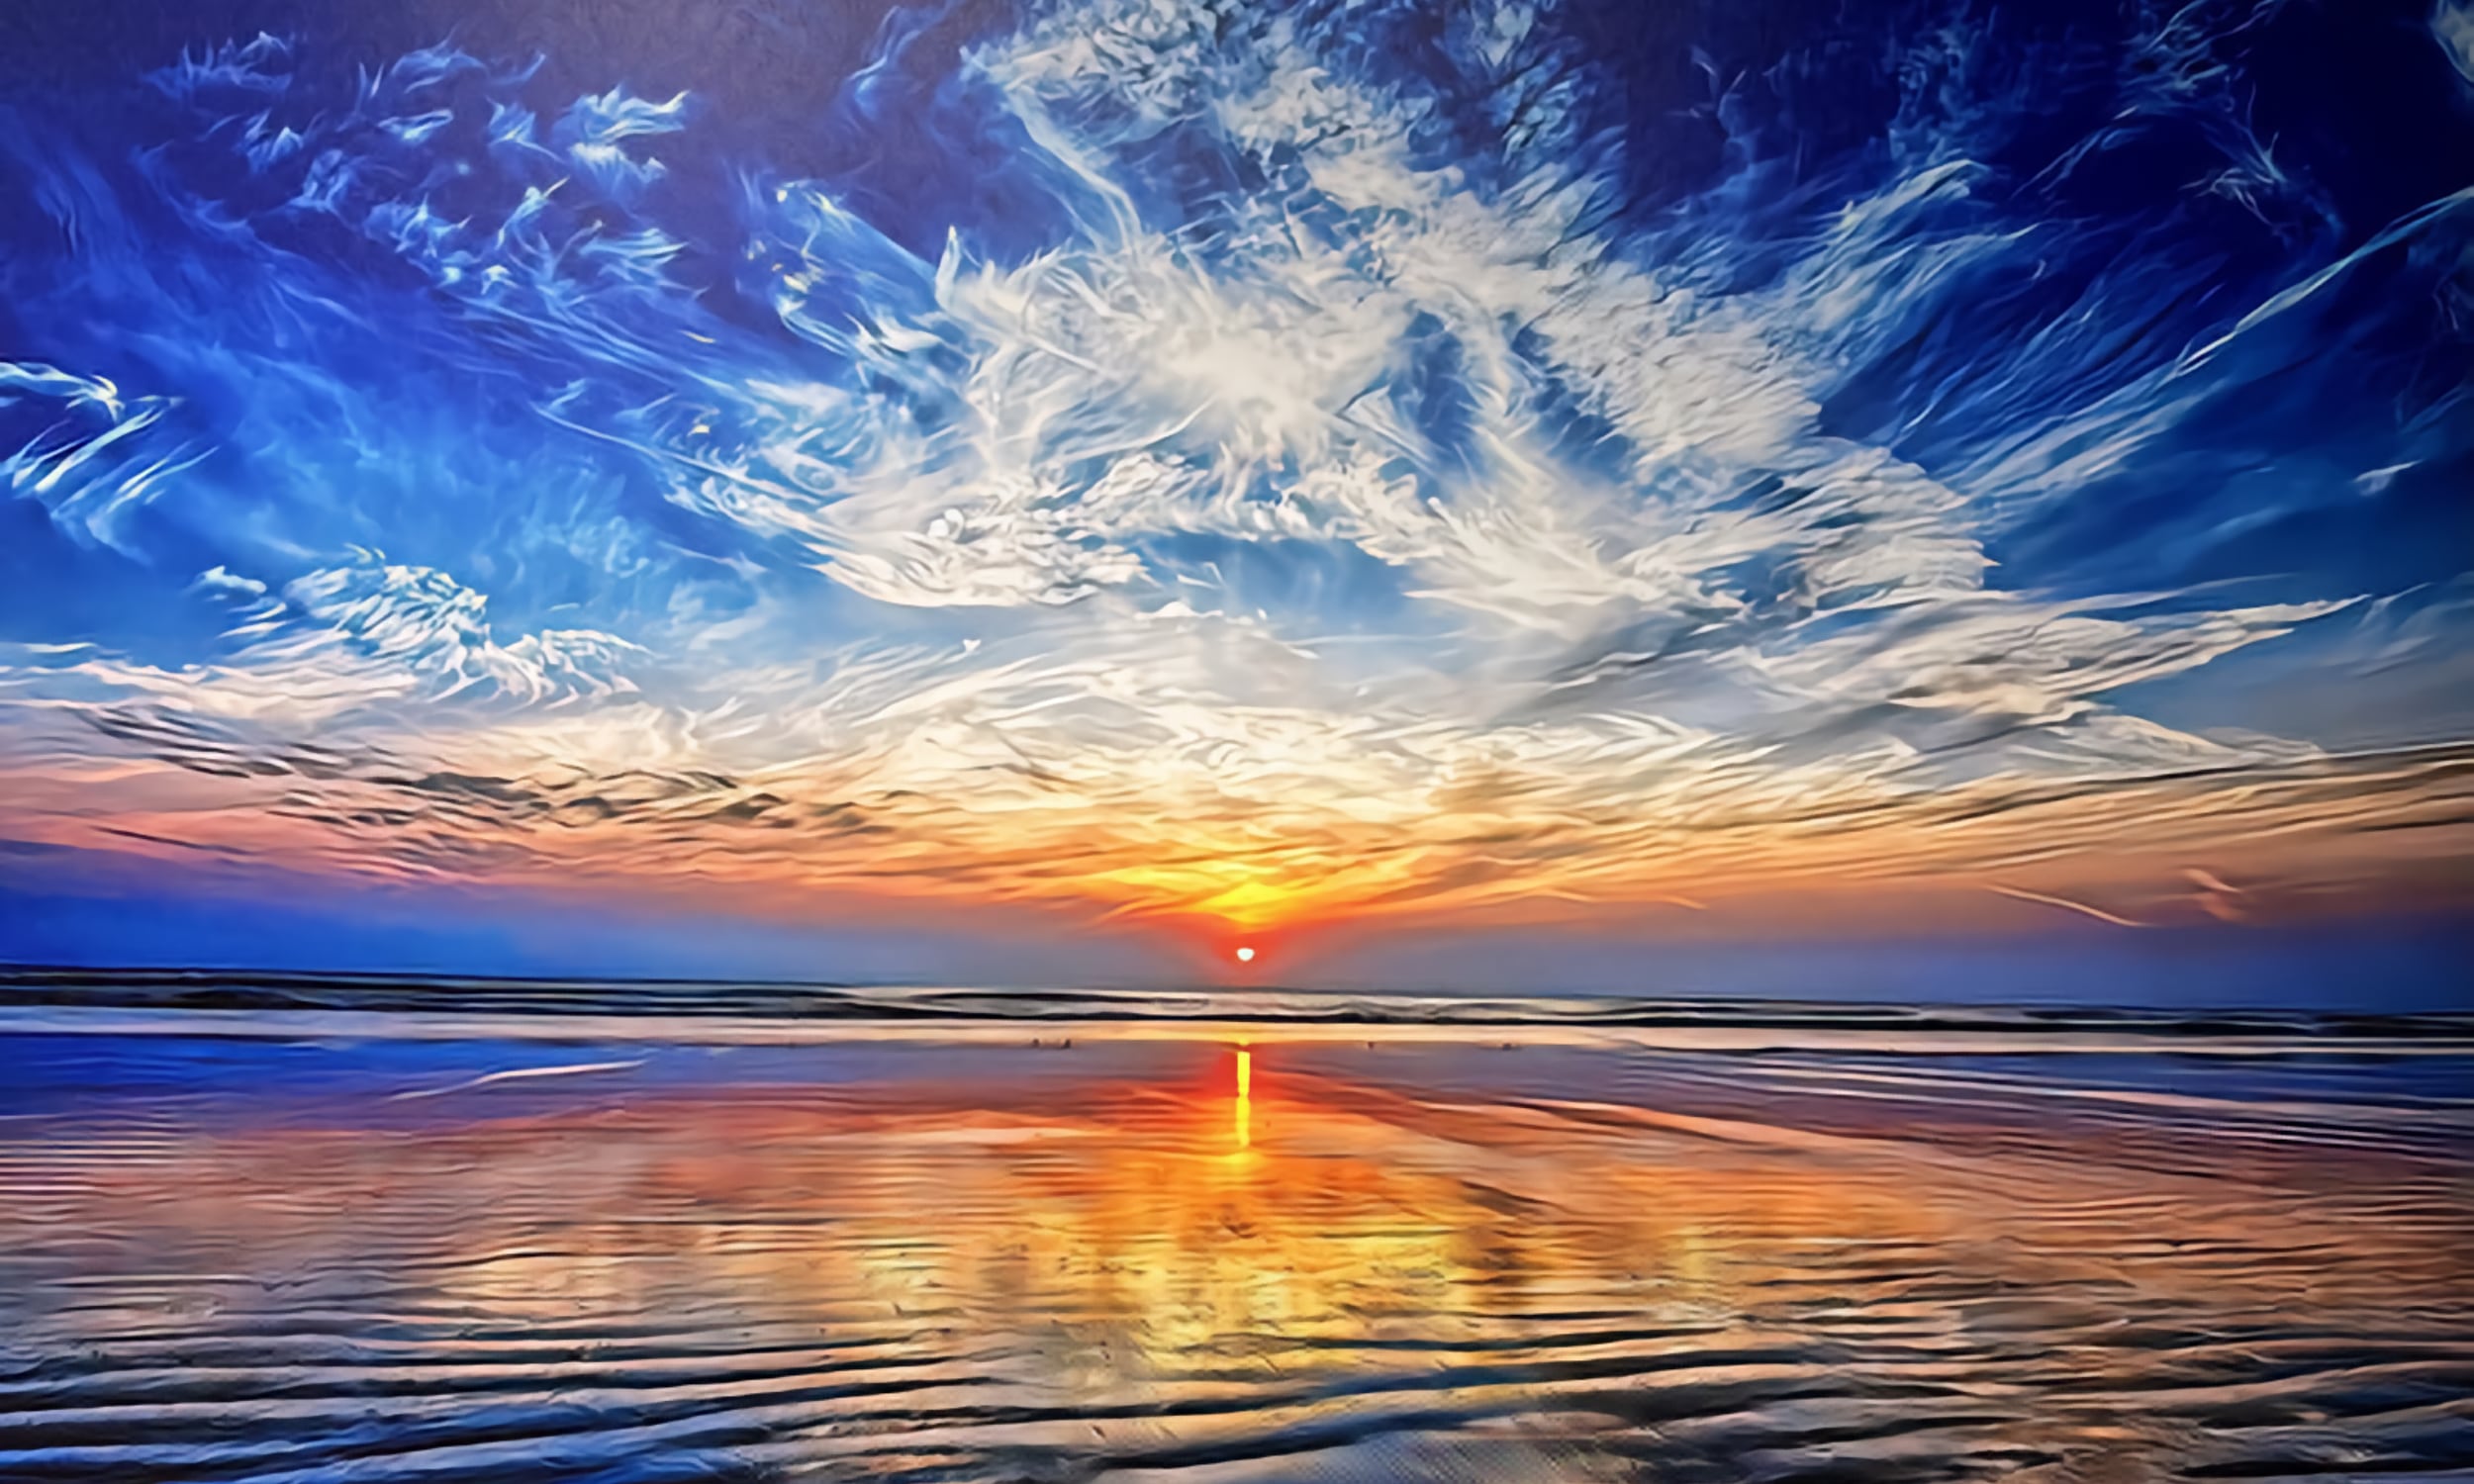 A David Fain photograph of the sun on the horizon, reflecting on the water